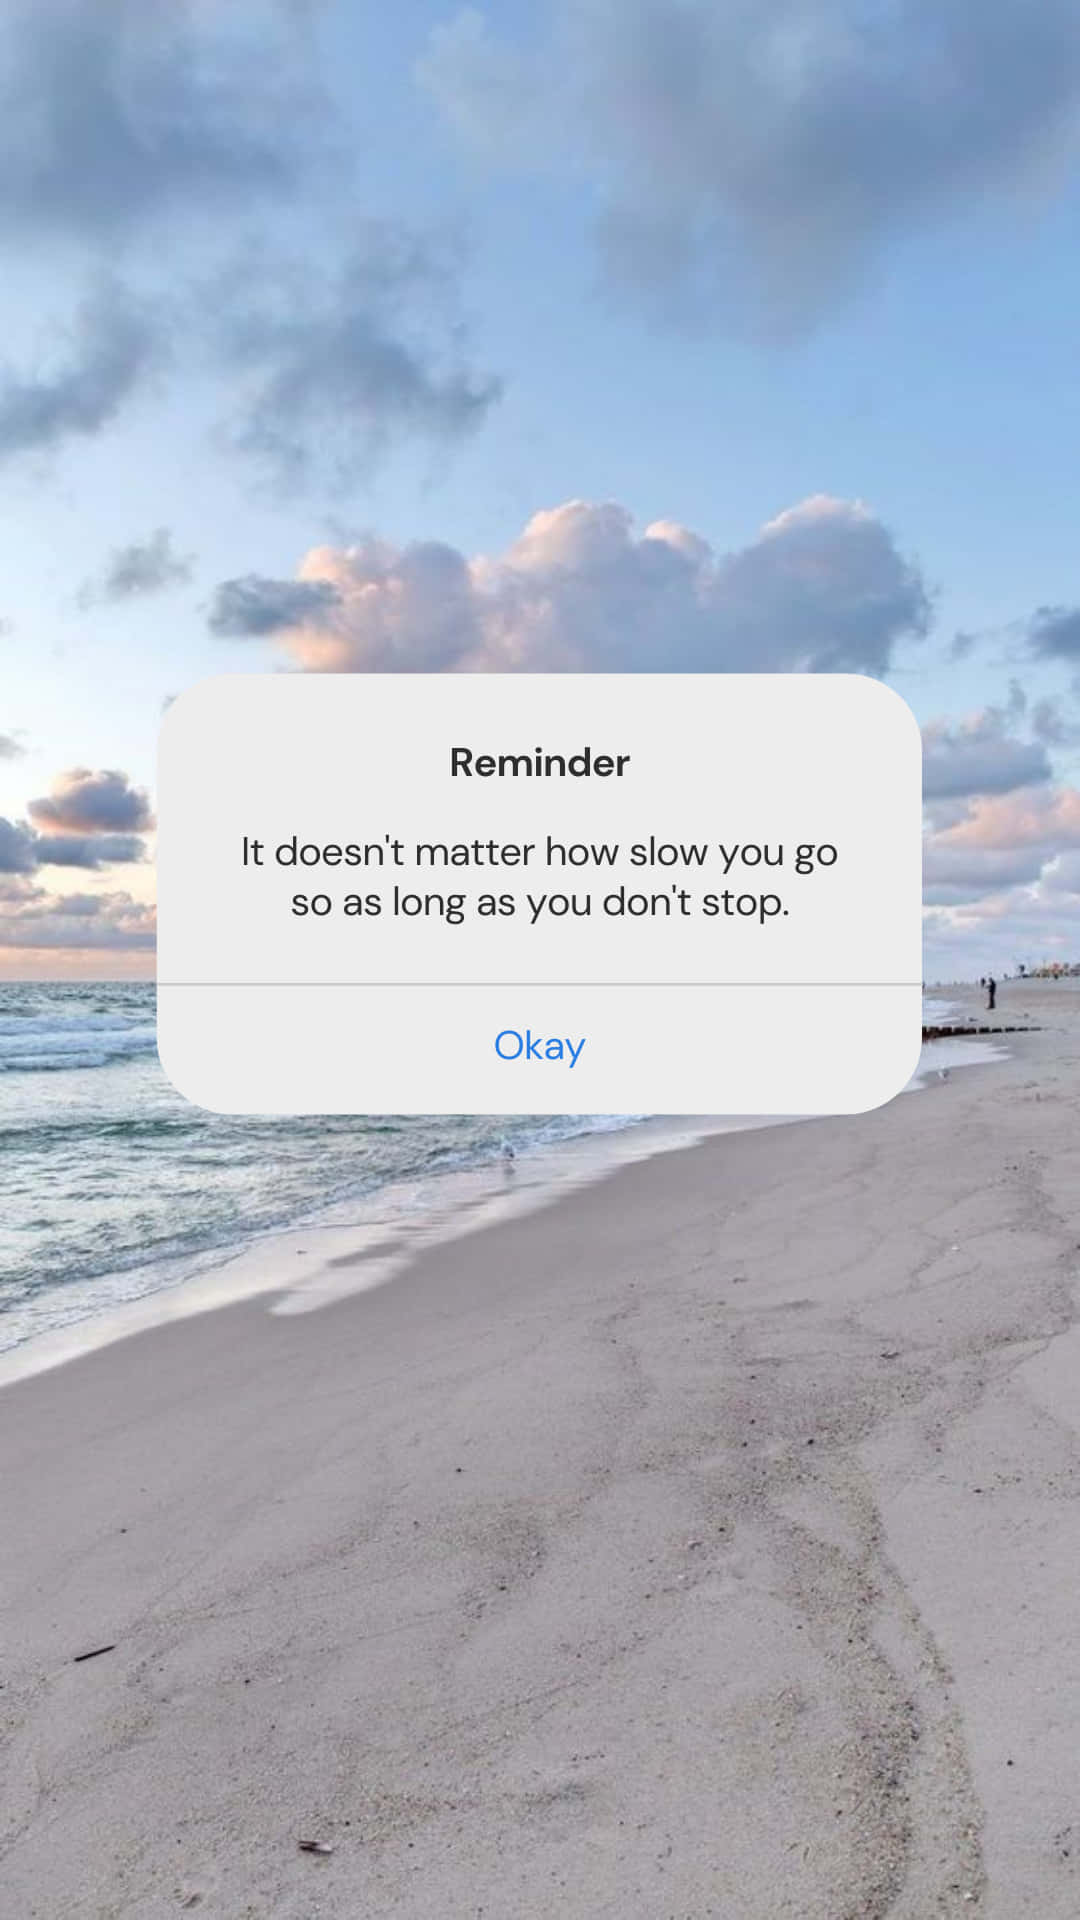 Download A Screenshot Of The Reminder App On An Iphone | Wallpapers.com